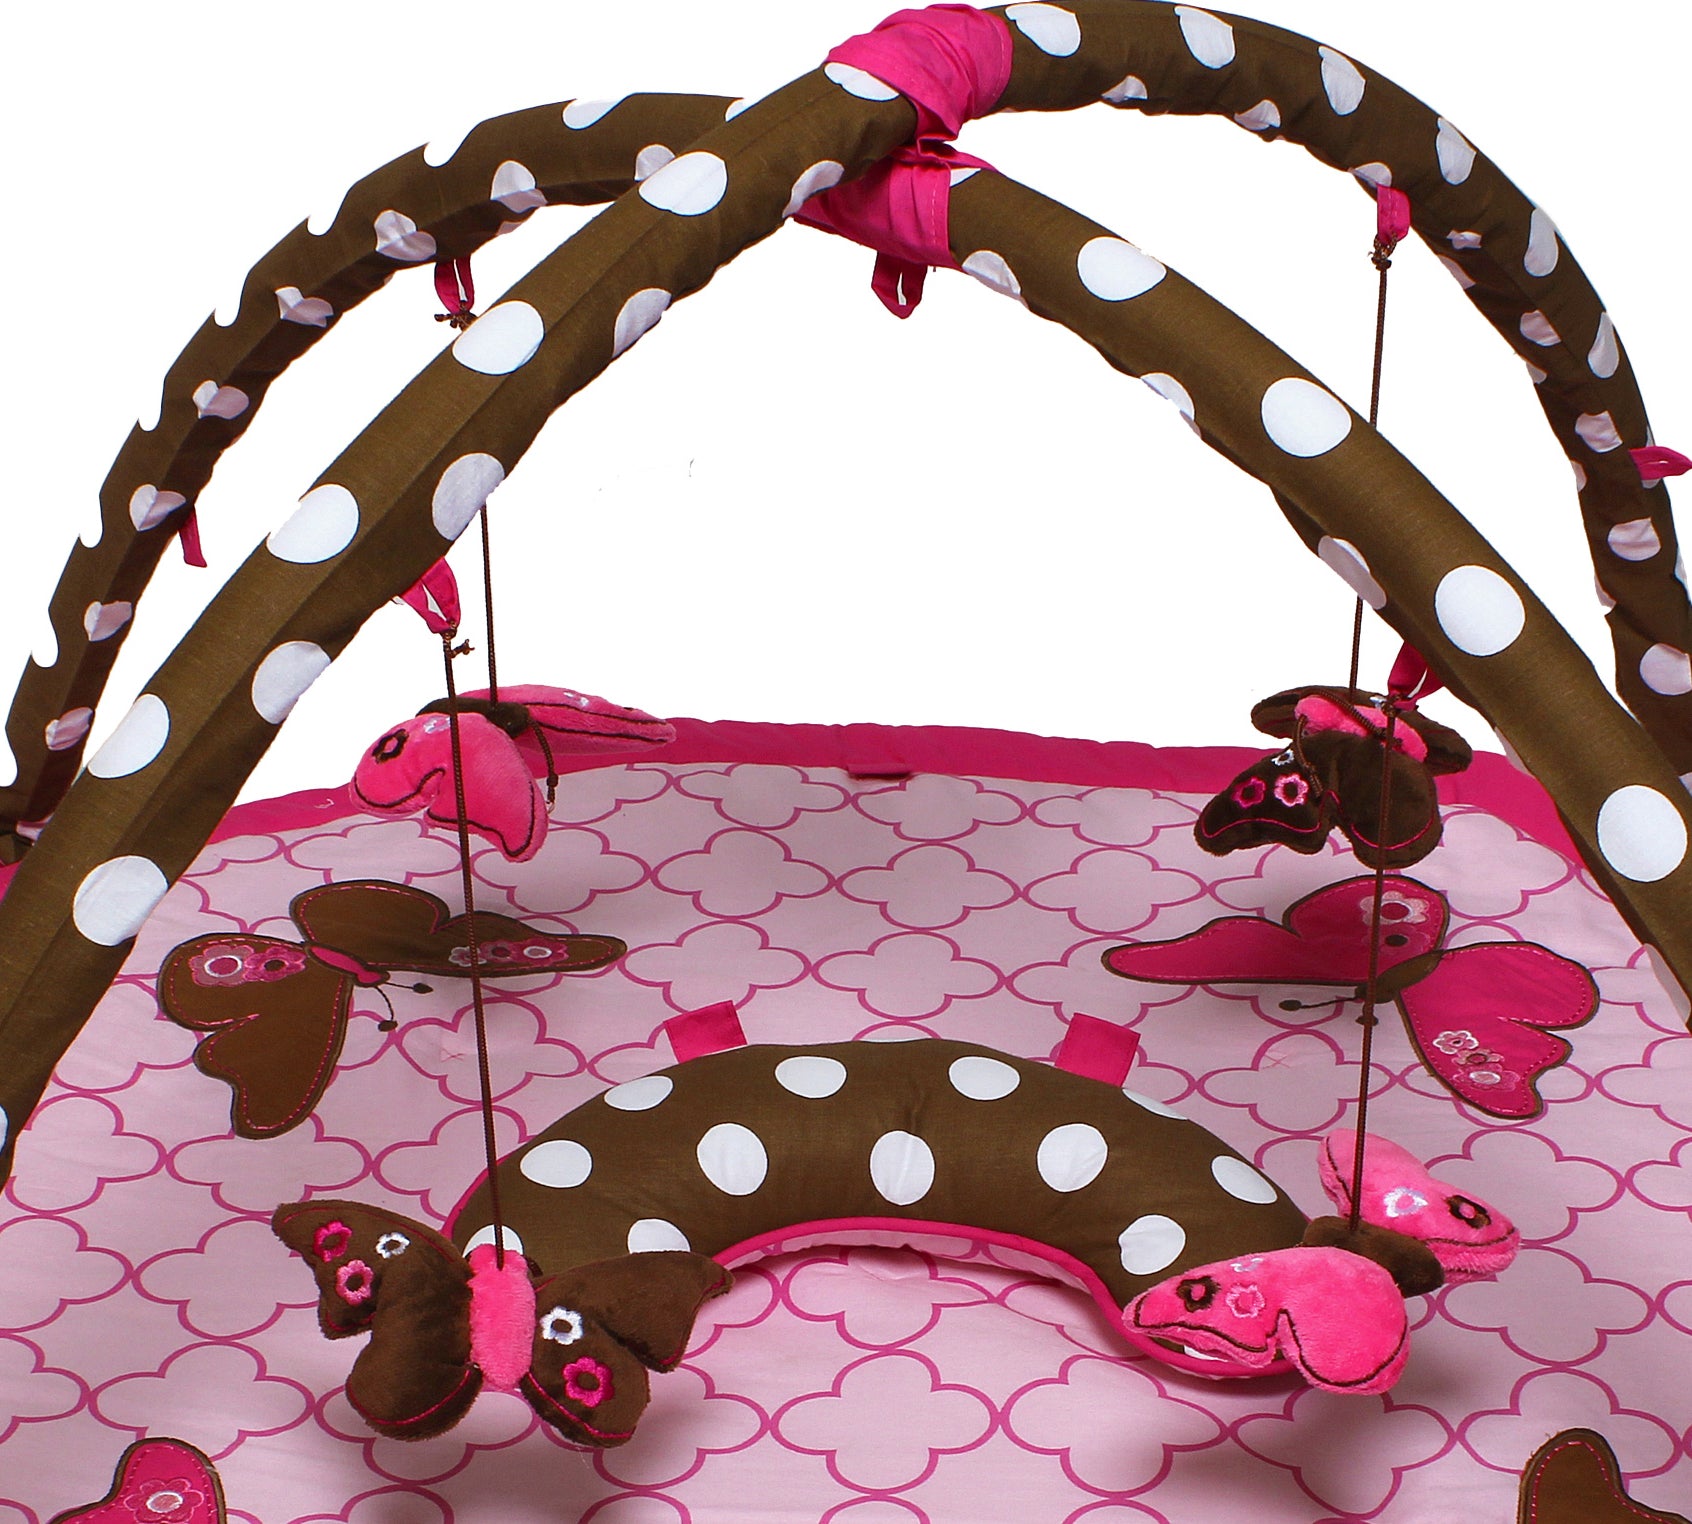 Bacati - Playmat/Baby Activity Gym with Mat, Butterflies Pink/Chocolate